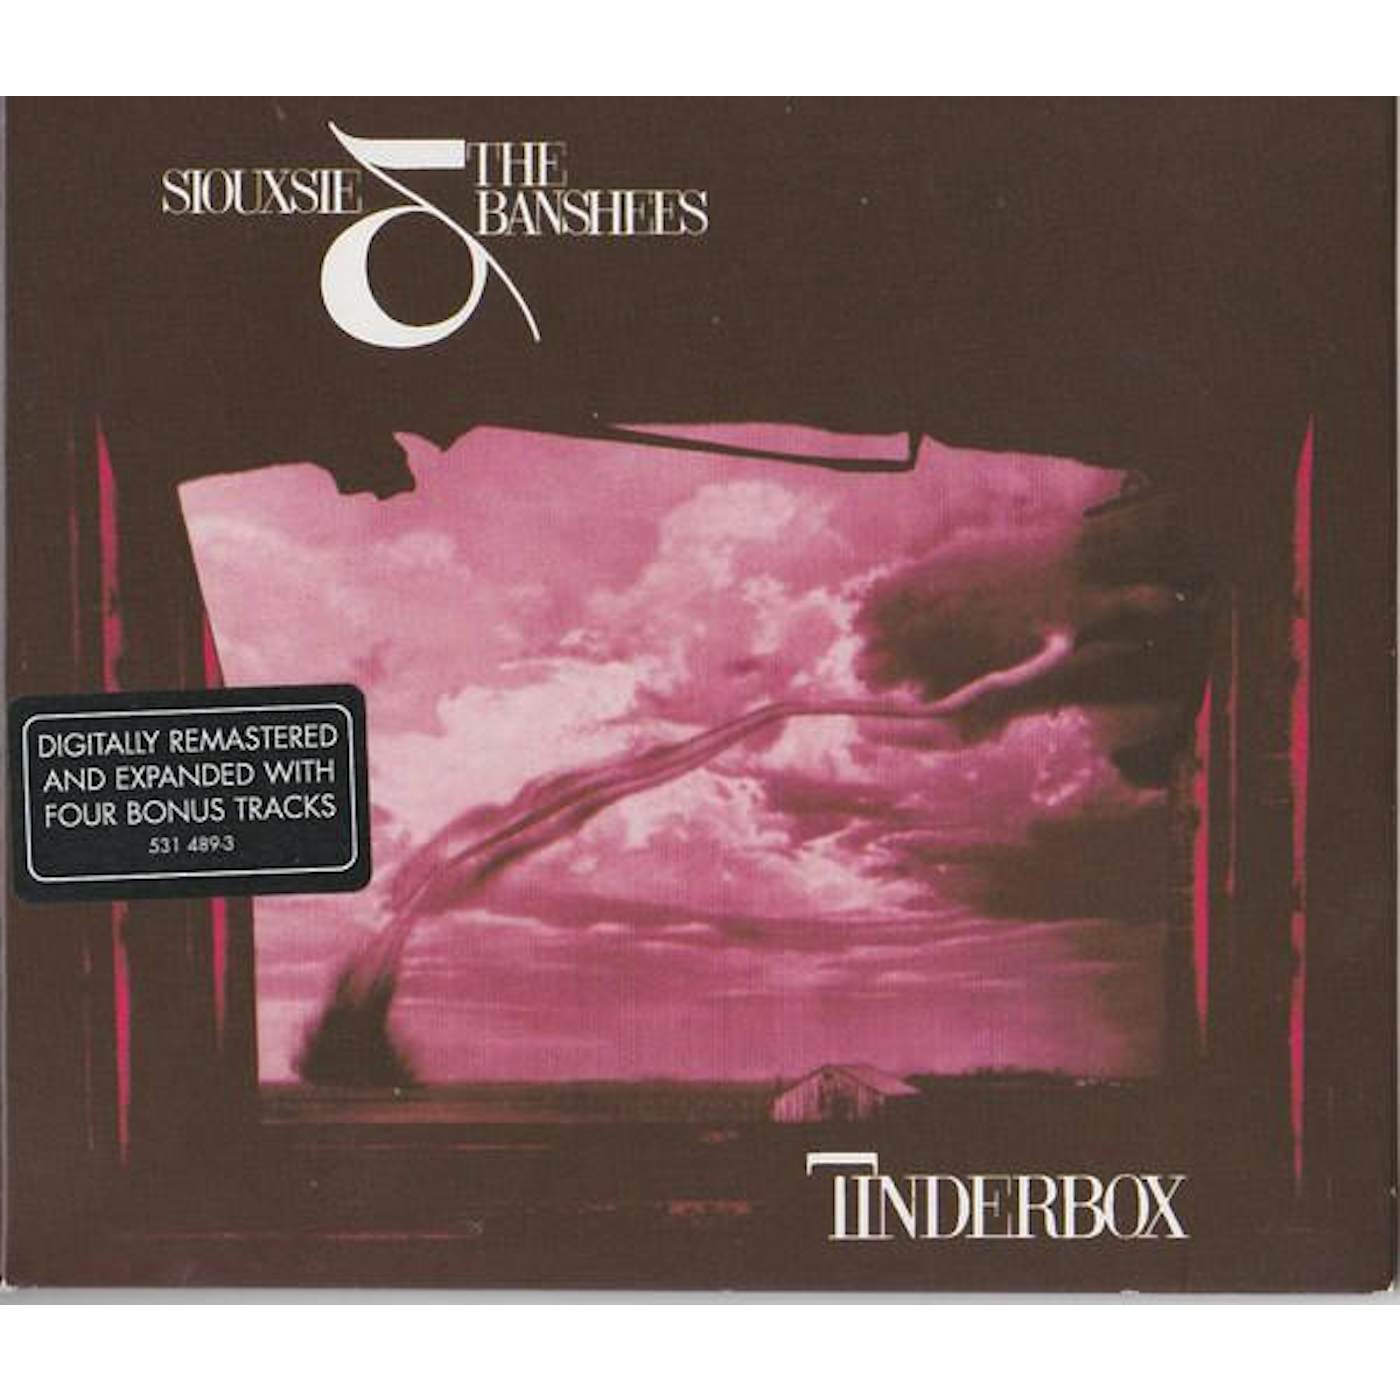 Siouxsie and the Banshees TINDERBOX CD